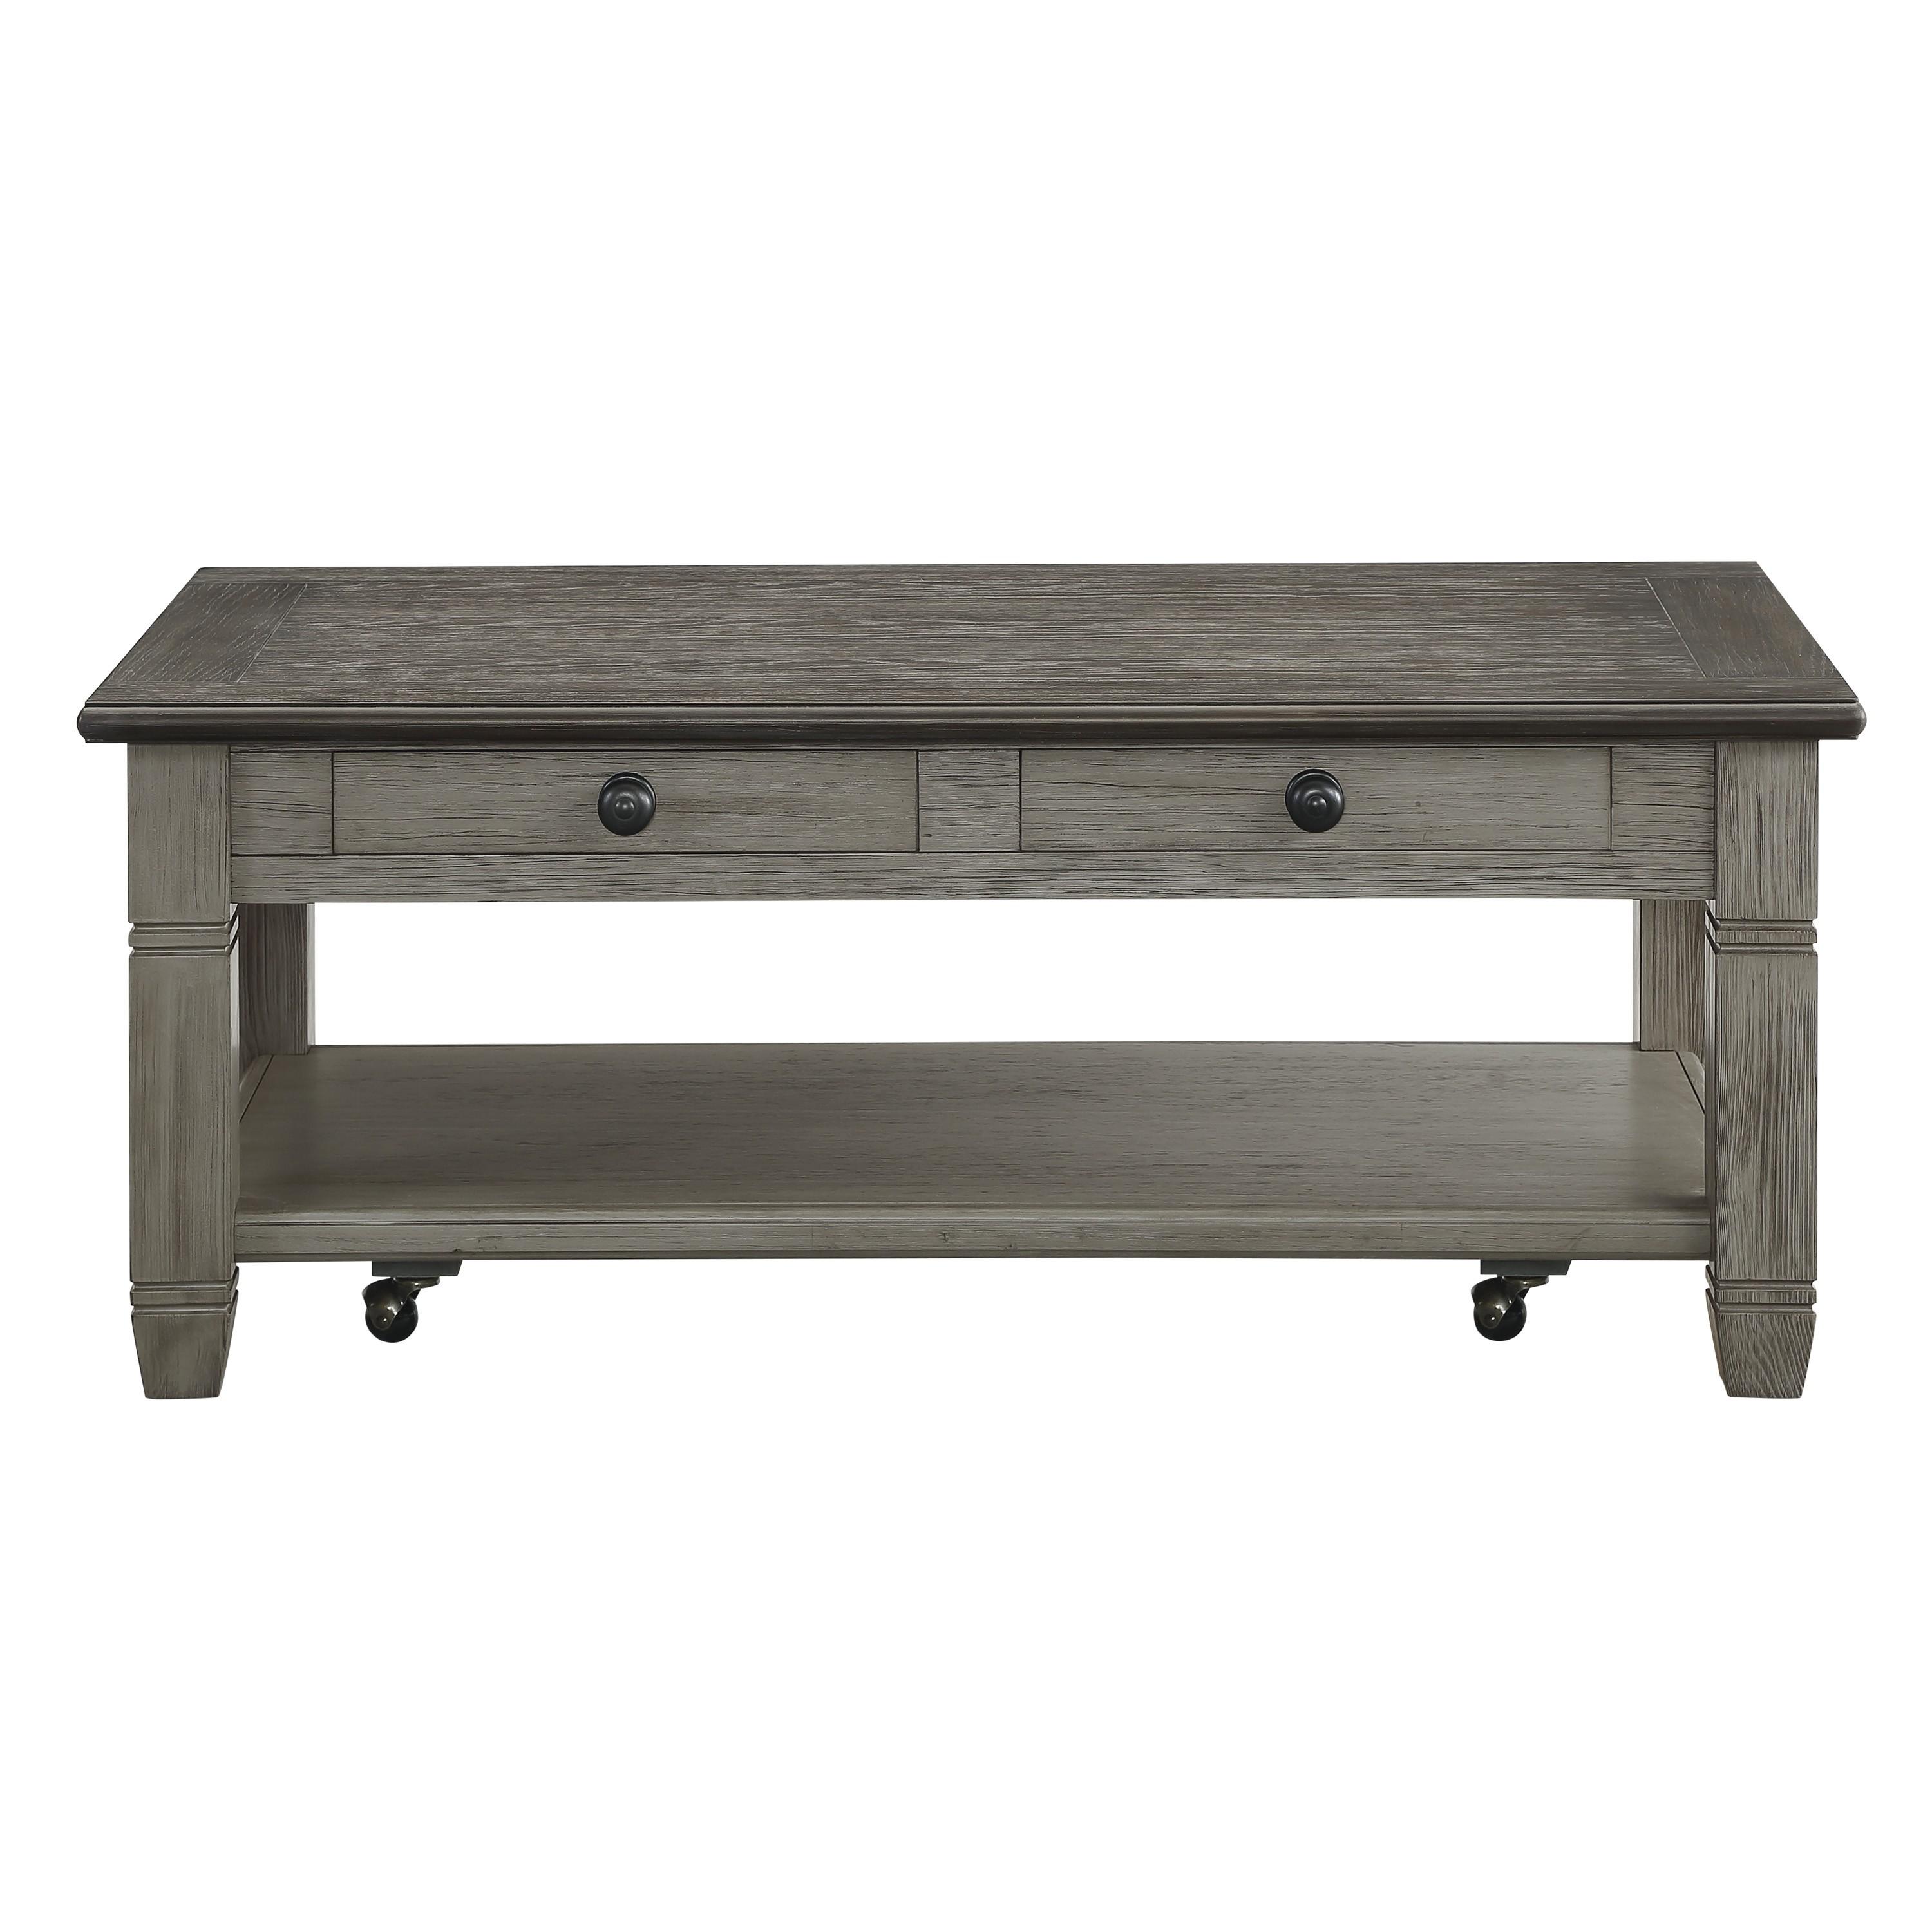 Cottage Cocktail Table 5627GY-30 Granby 5627GY-30 in Gray, Coffee 